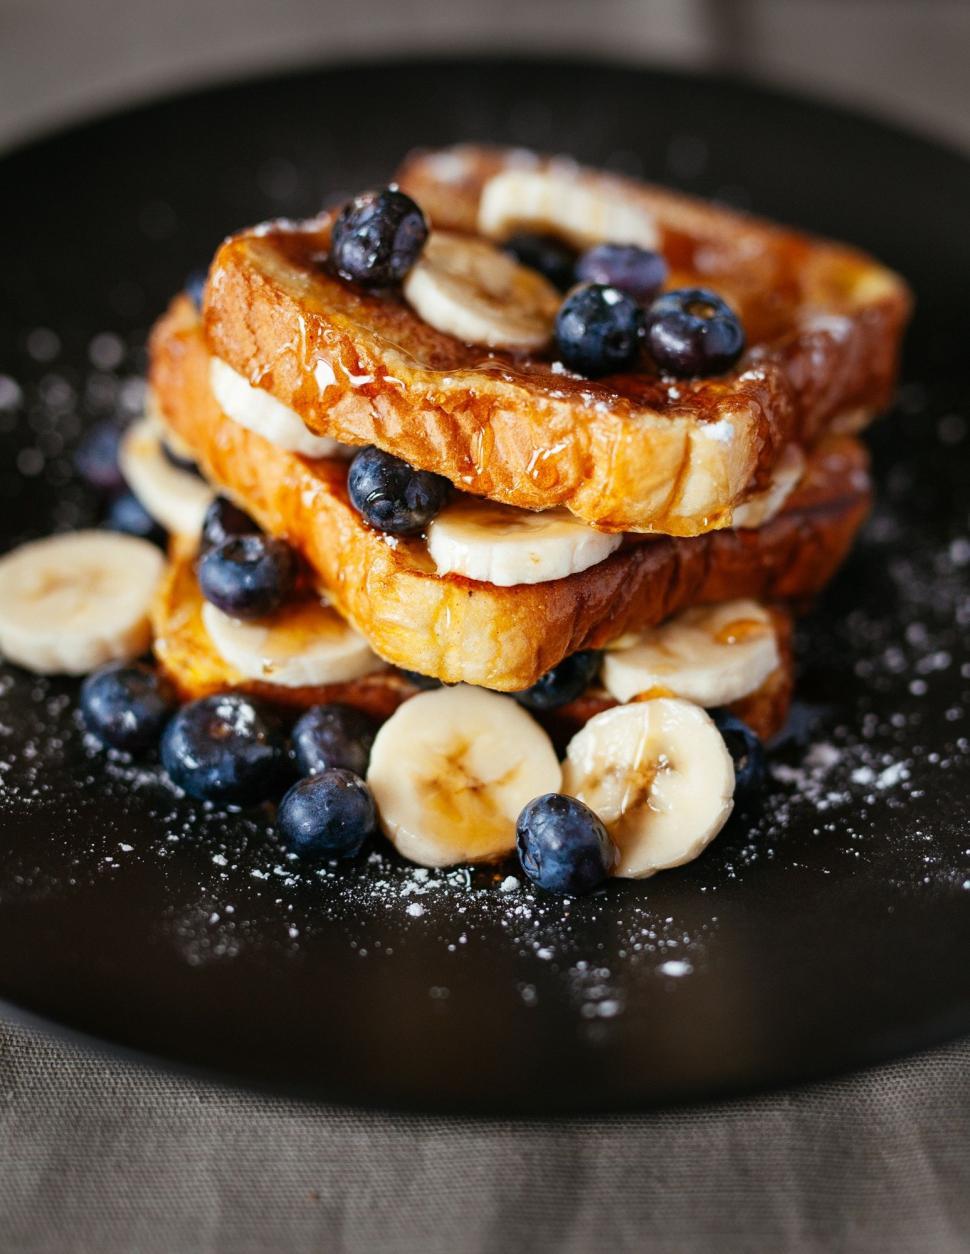 Free Image of Black Plate With Bananas and Blueberries 